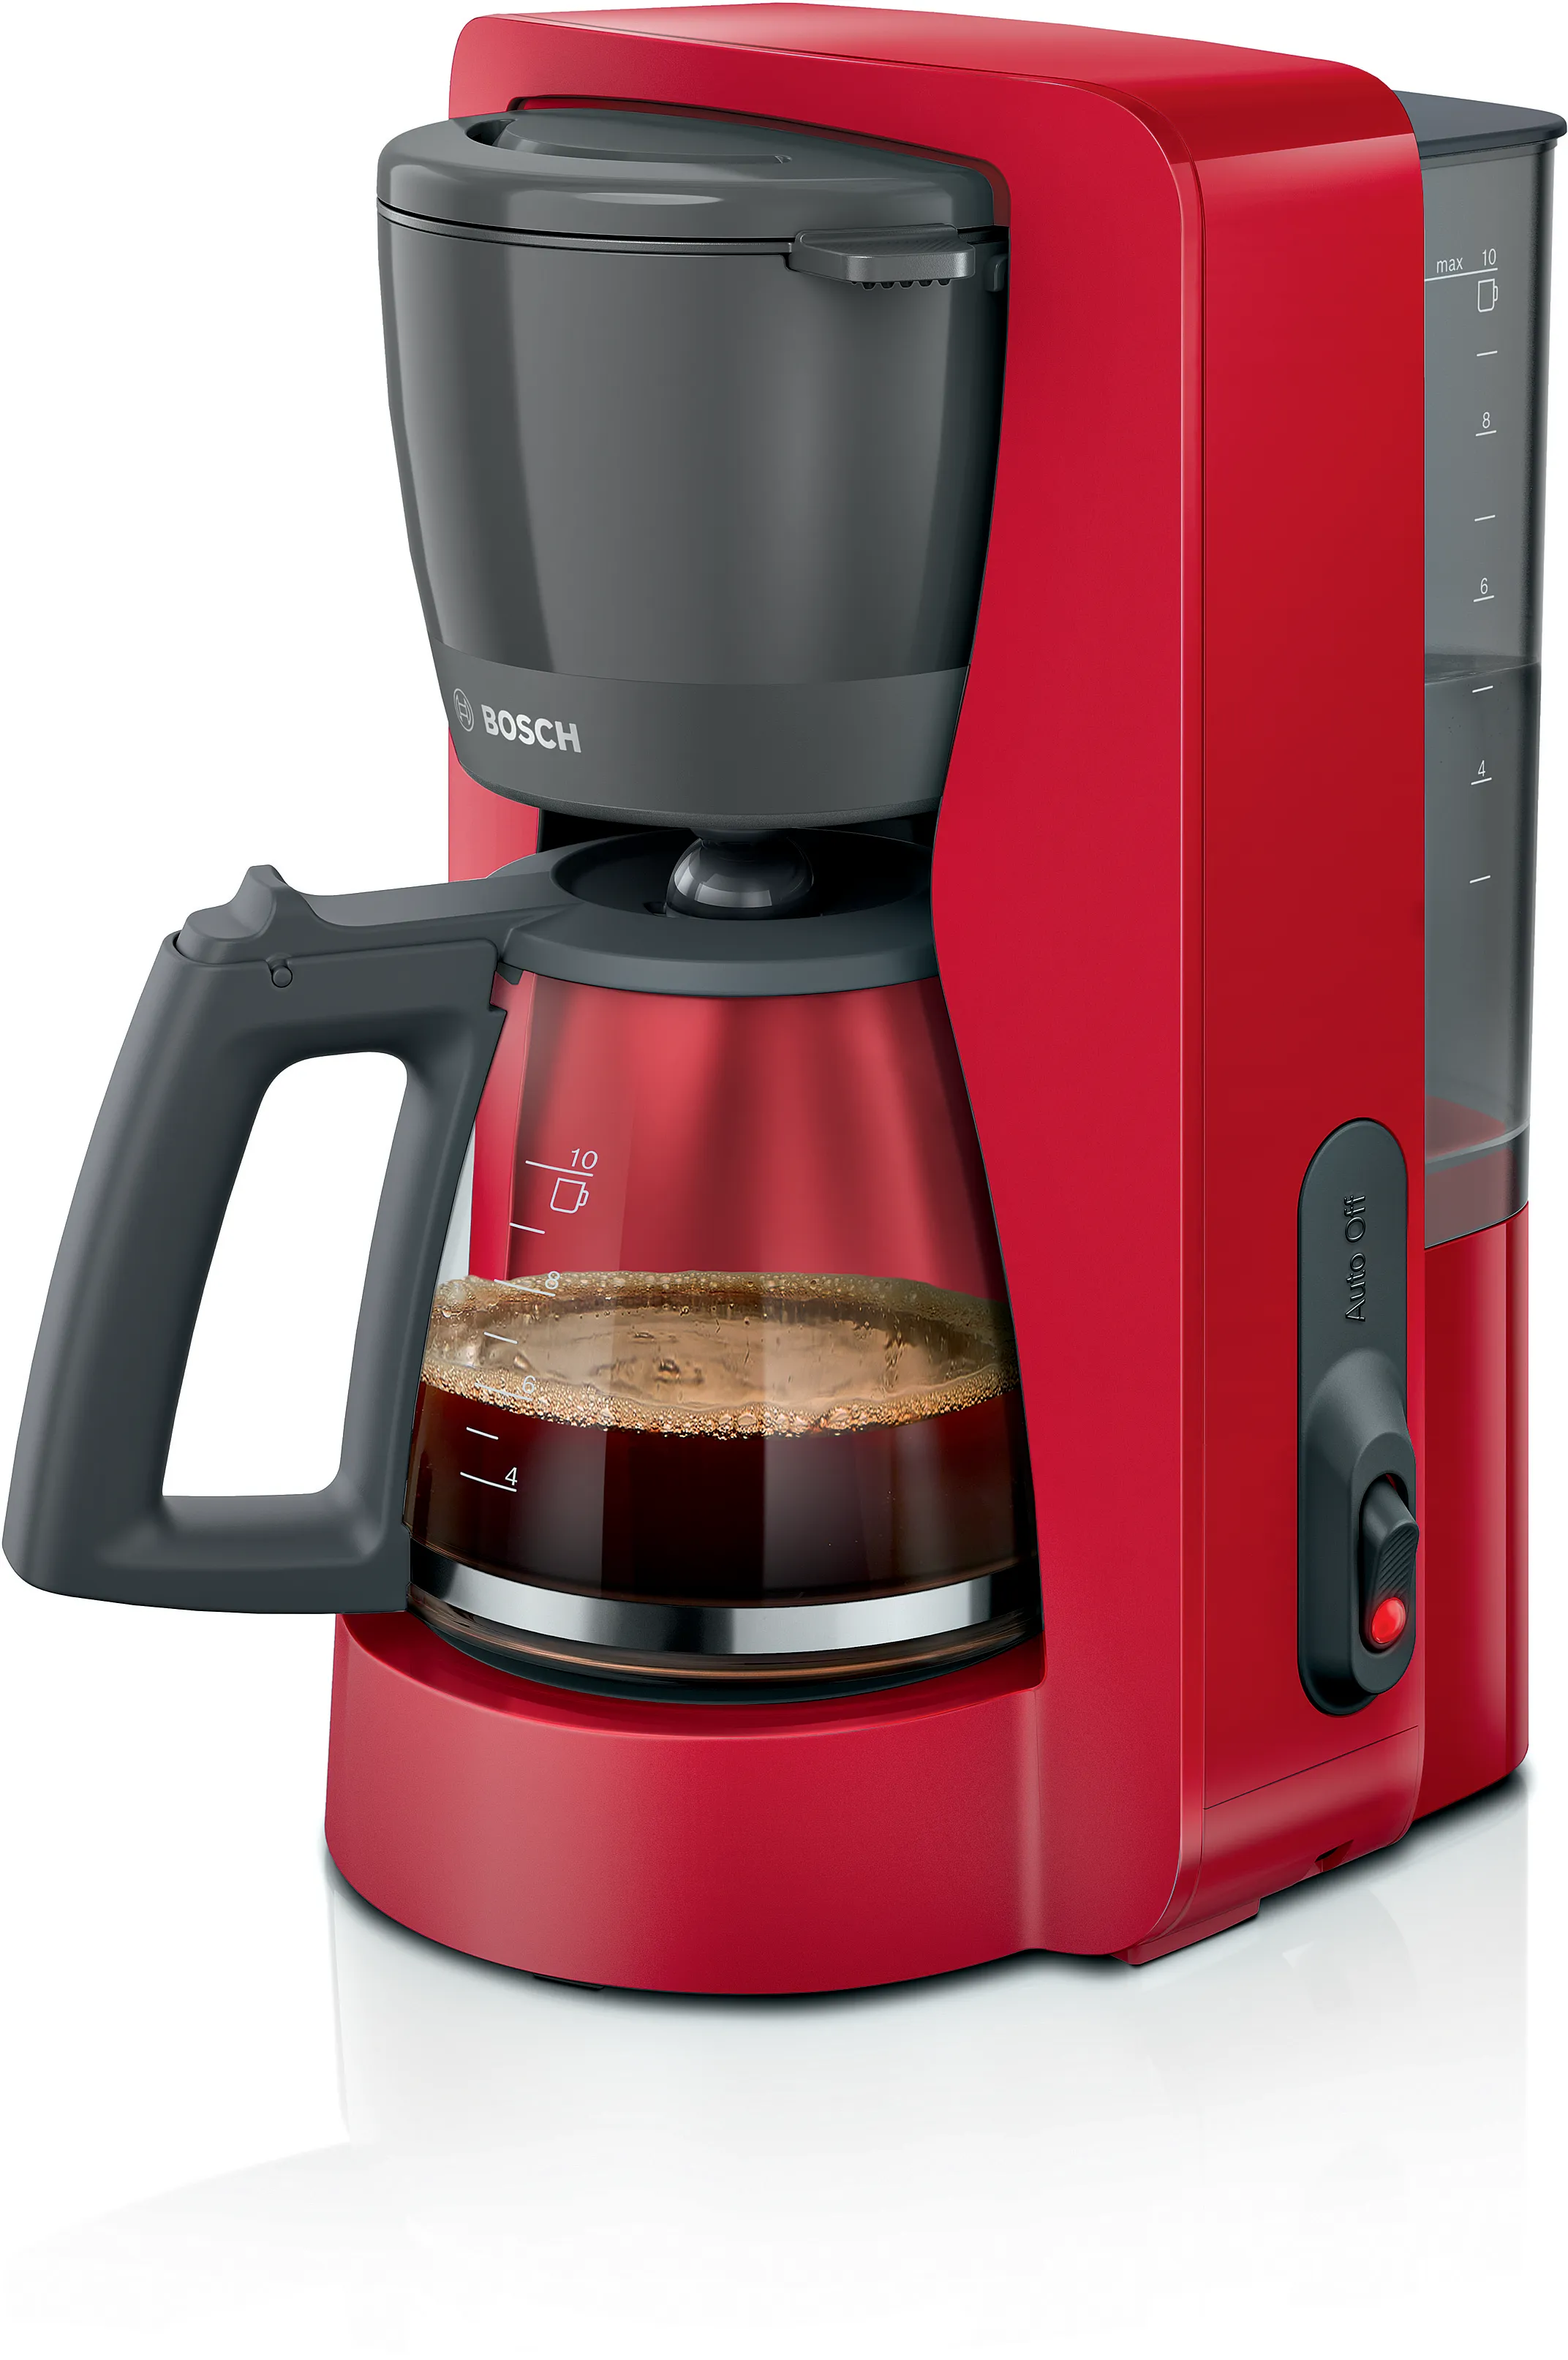 Coffee maker MyMoment Red 